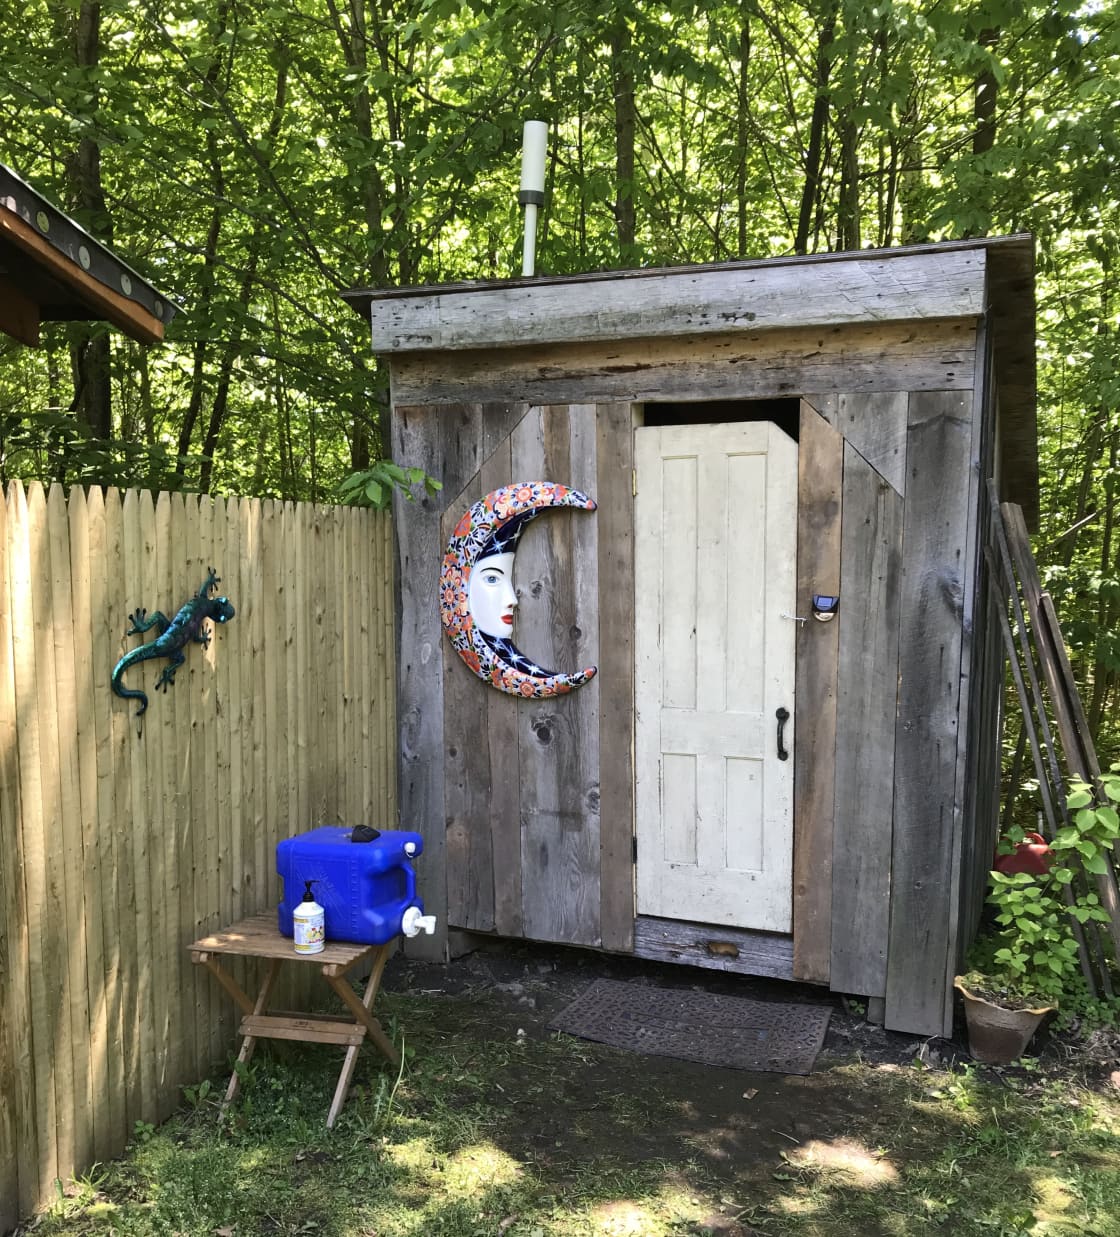 Our composting outhouse and sink station